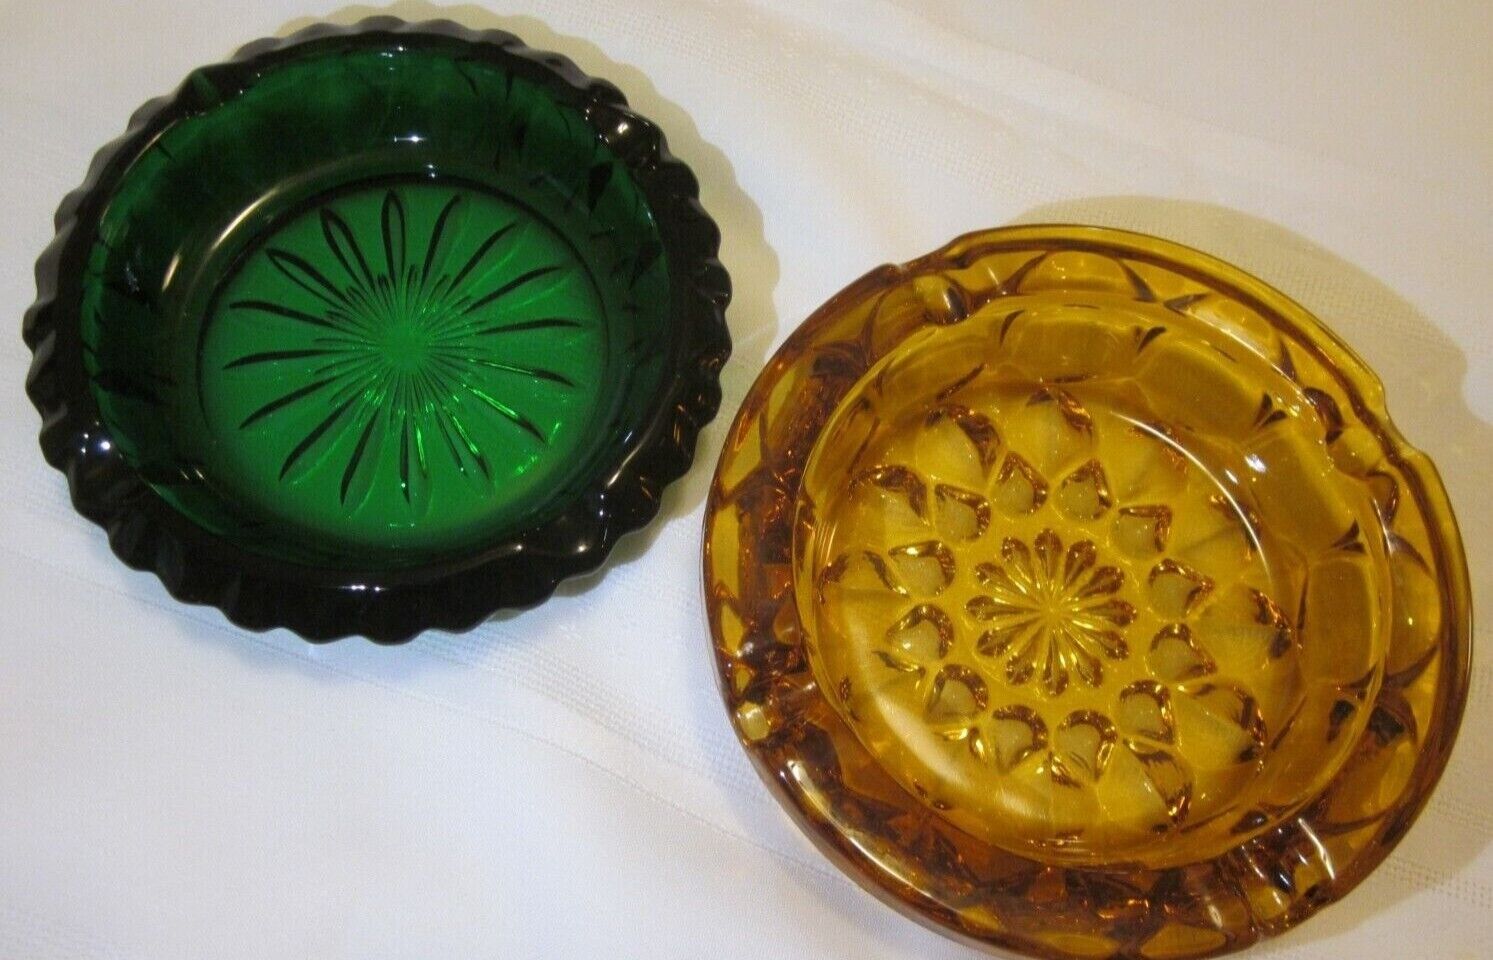 Two Vintage Heavy Patterned Glass Emerald Green and Amber Ashtrays